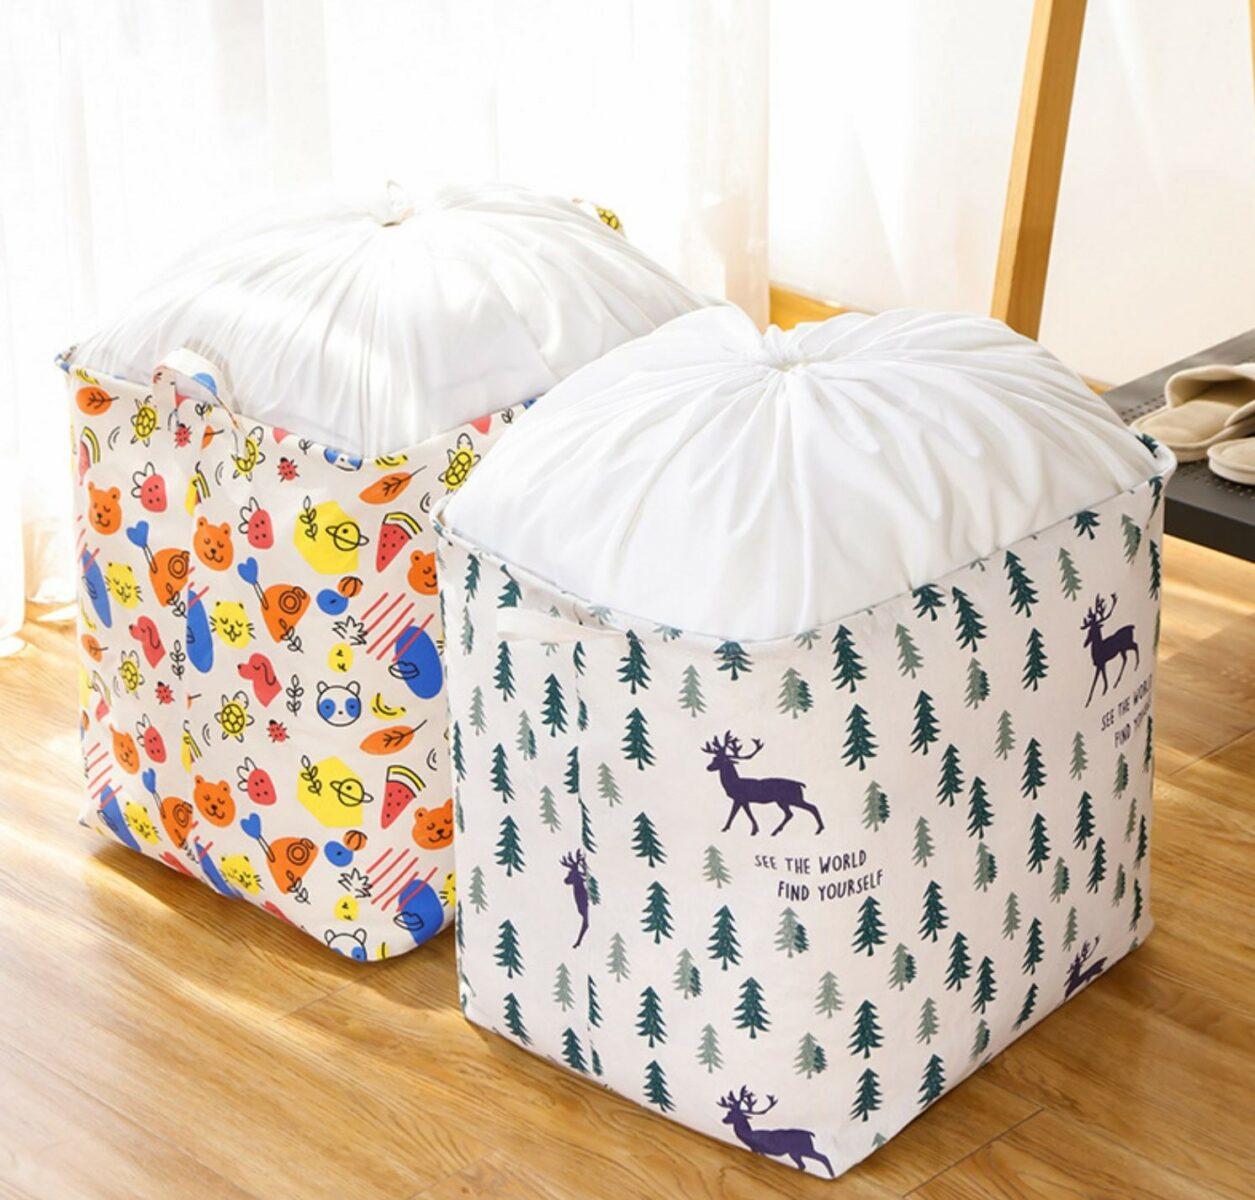 Collapsible Storage/Laundry Basket